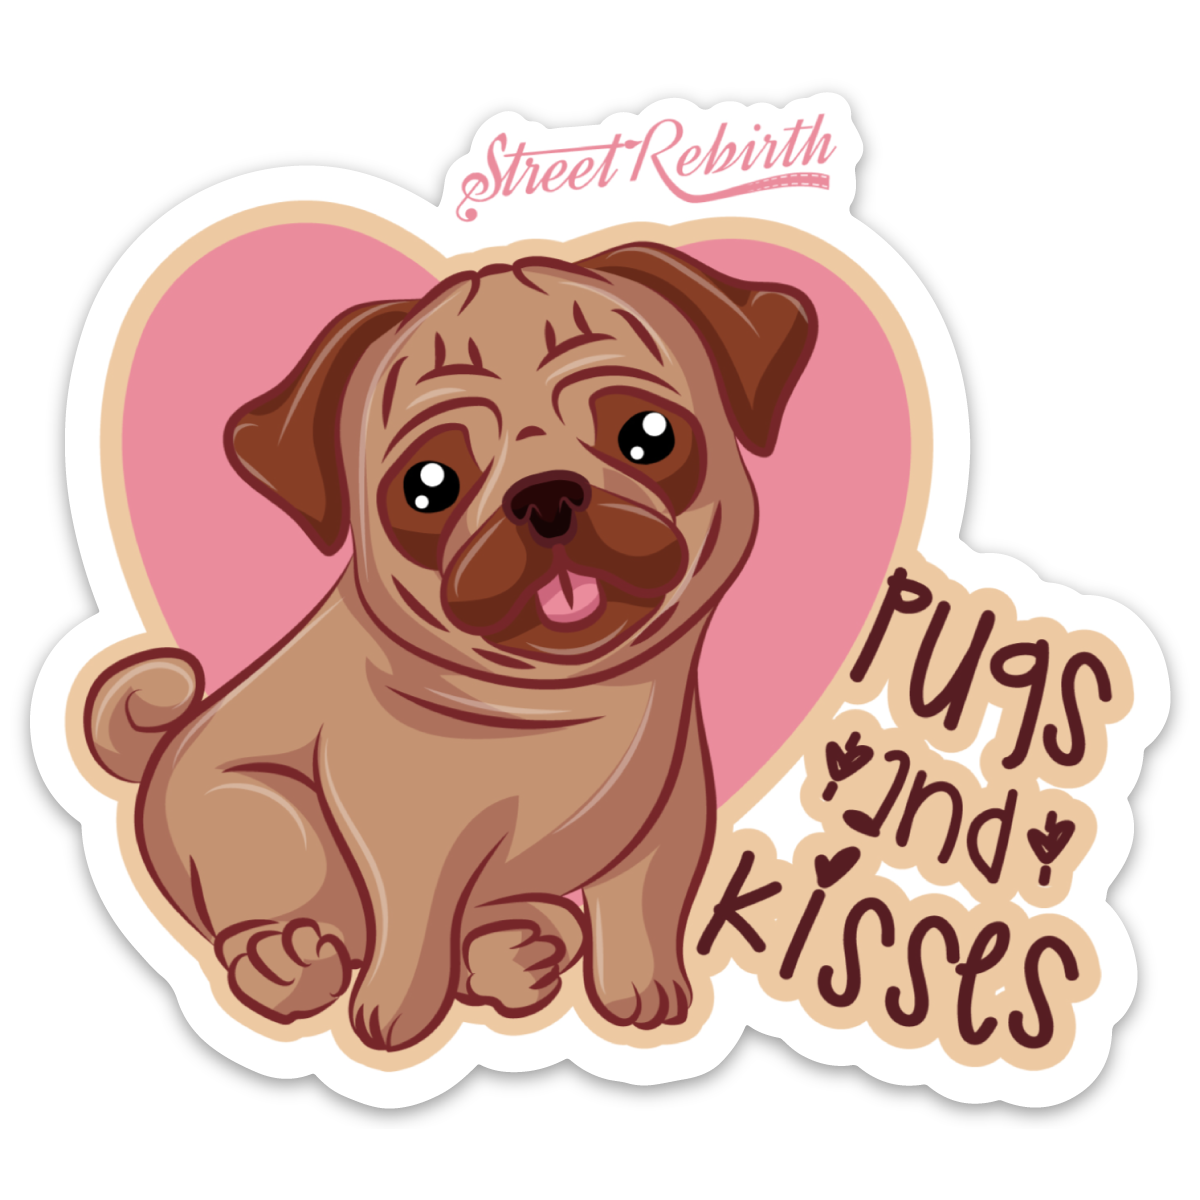 PUGS AND KISSES STICKER – ONE 4 INCH WATER PROOF VINYL STICKER – FOR HYDRO FLASK, SKATEBOARD, LAPTOP, PLANNER, CAR, COLLECTING, GIFTING